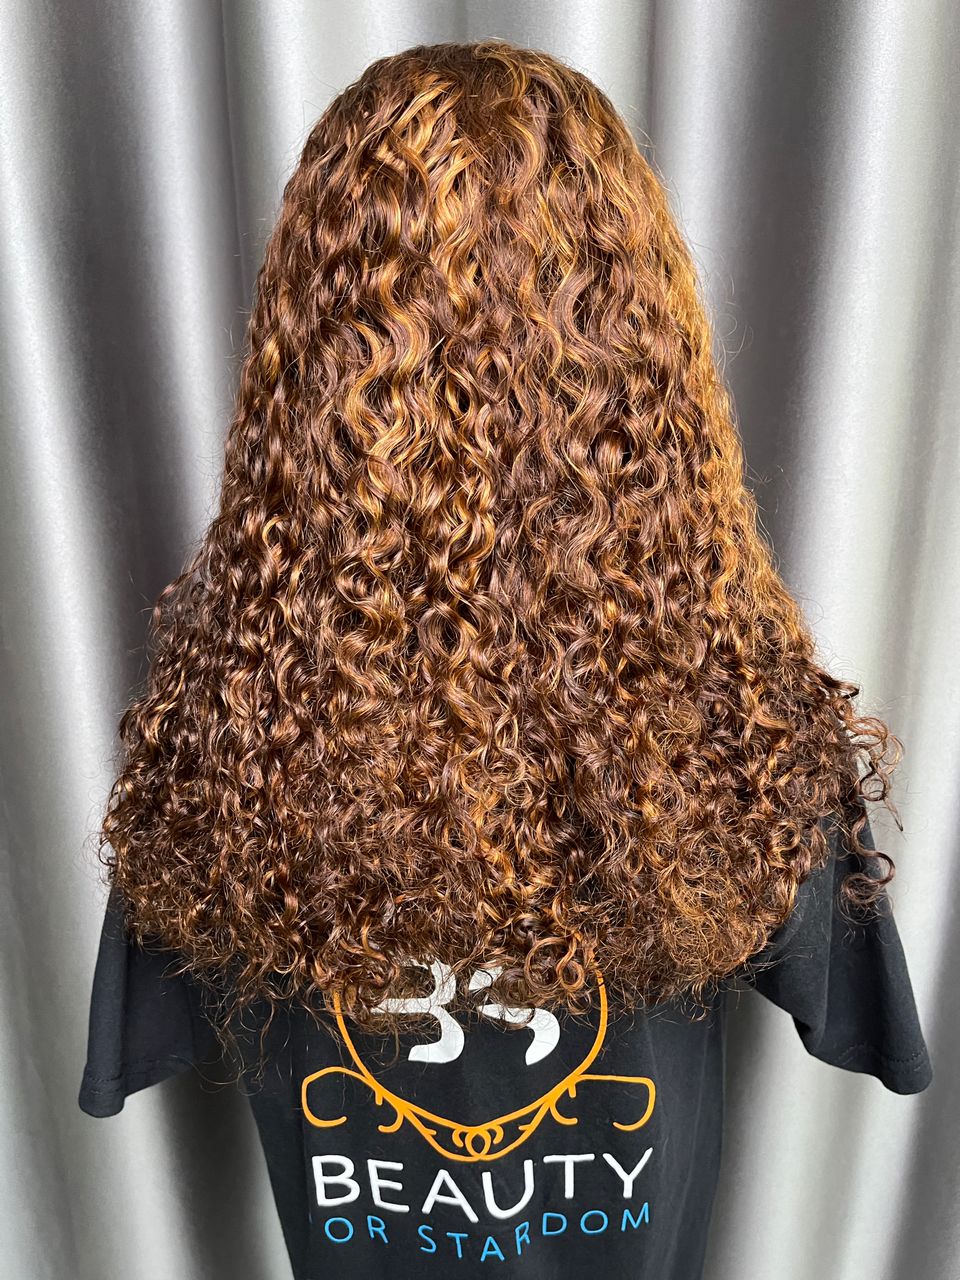 18inch Water Curly Wig, 200% density